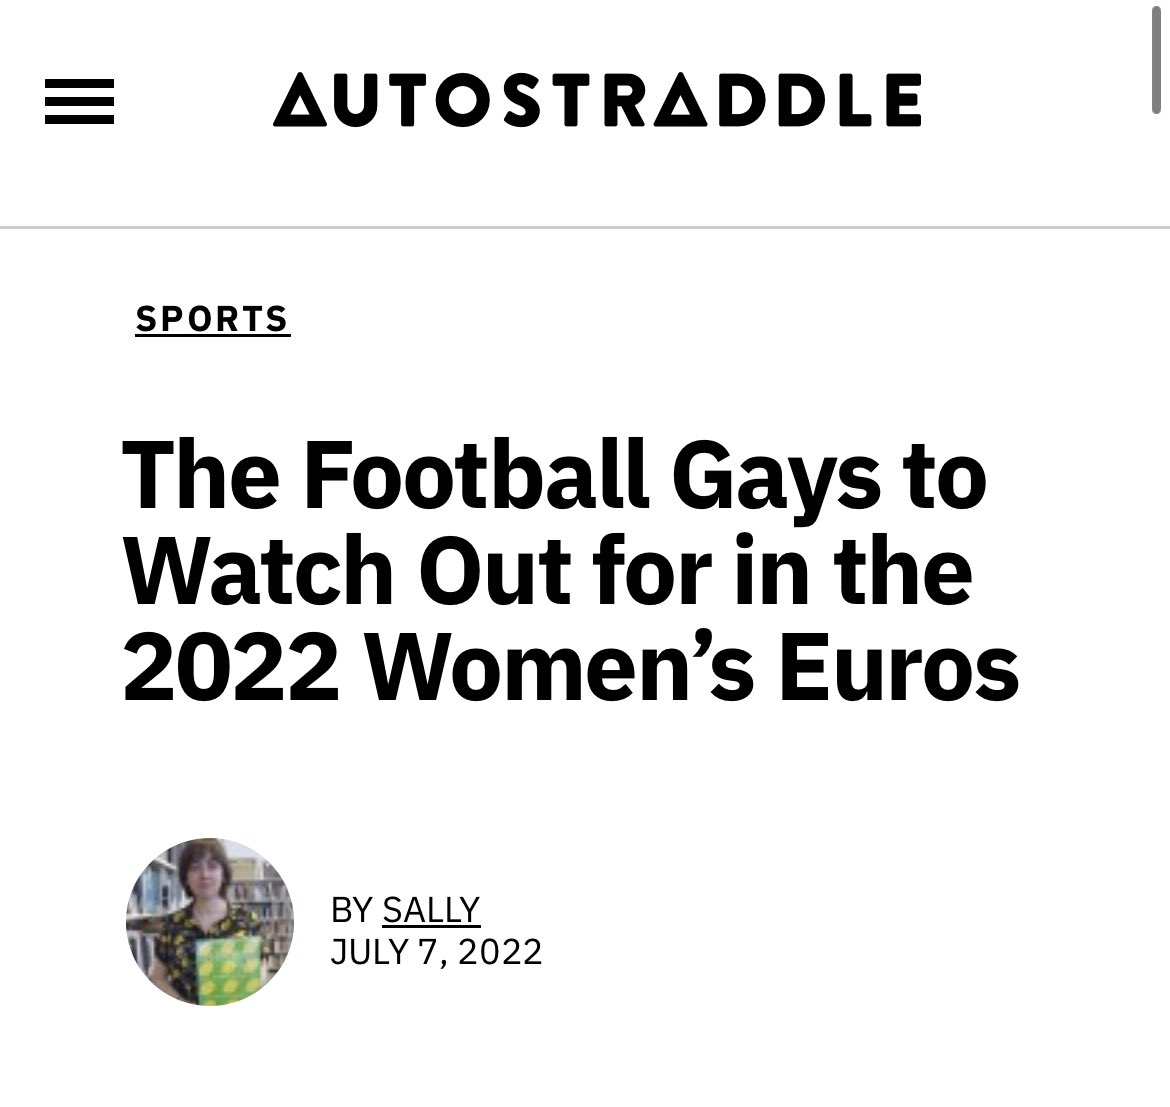 Lesbian and Queer women are the backbone of the Women’s World Cup, we celebrate them today and every day. We are ready for an updated article on football gays to watch out for @autostraddle ❤️🧡🤍💗